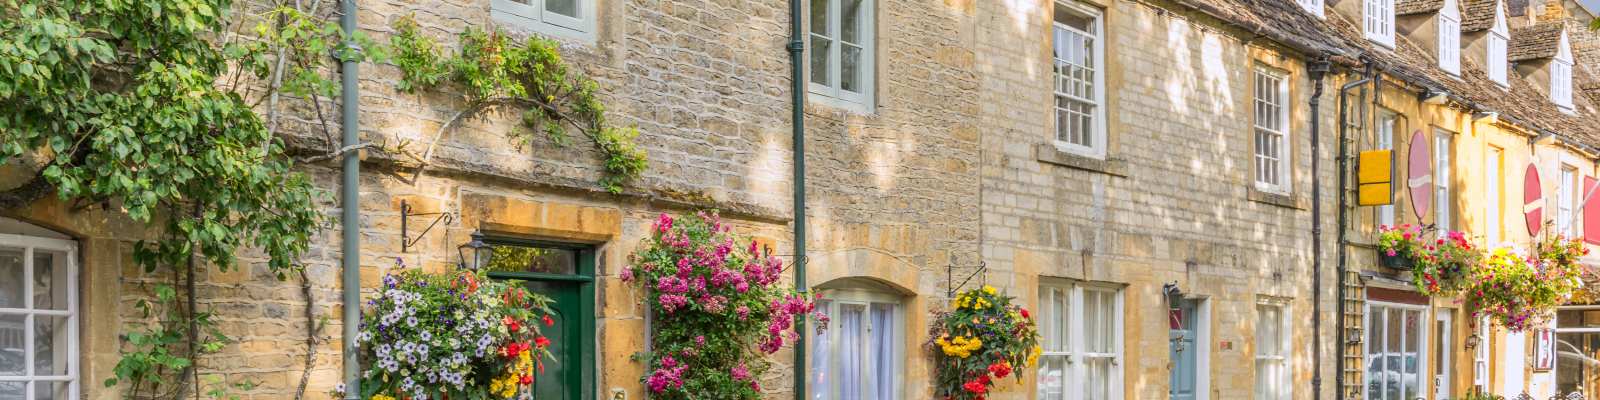 Holiday Cottages In Stow On The Wold To Rent Self Catering Stow